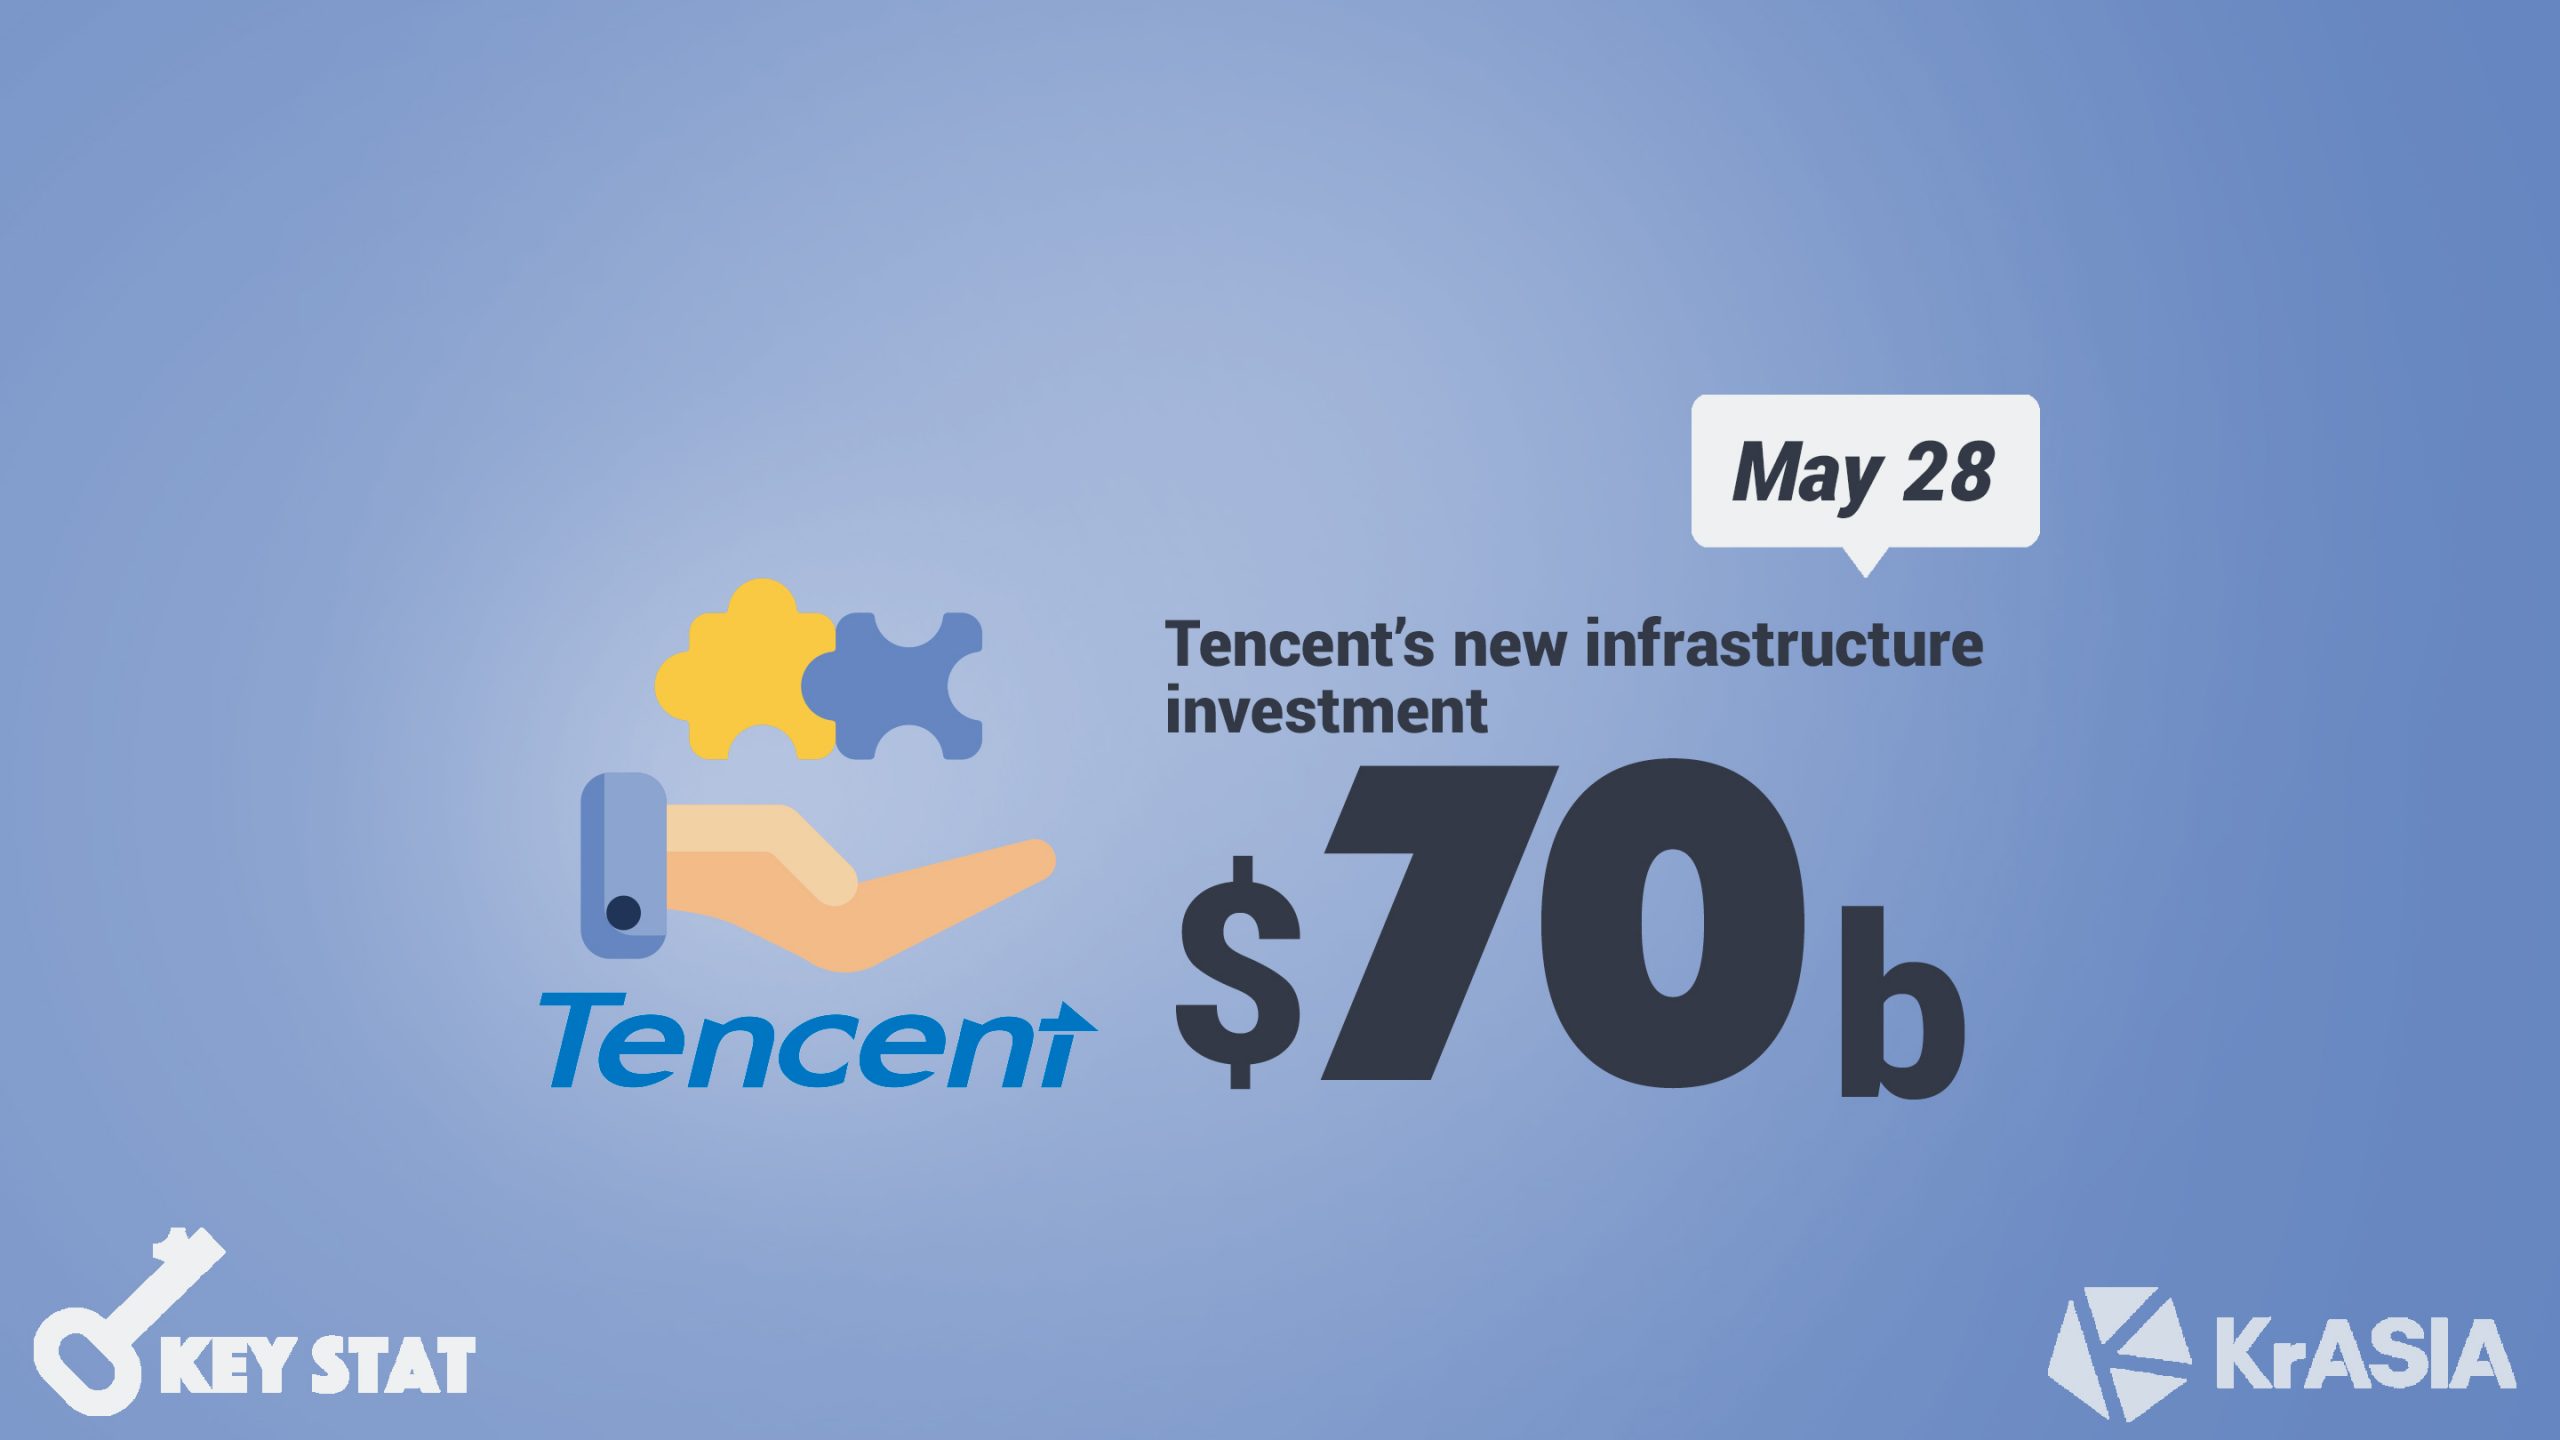 KEY STAT | Tencent announces USD 70 billion investments amidst China’s new infrastructure stimulus push